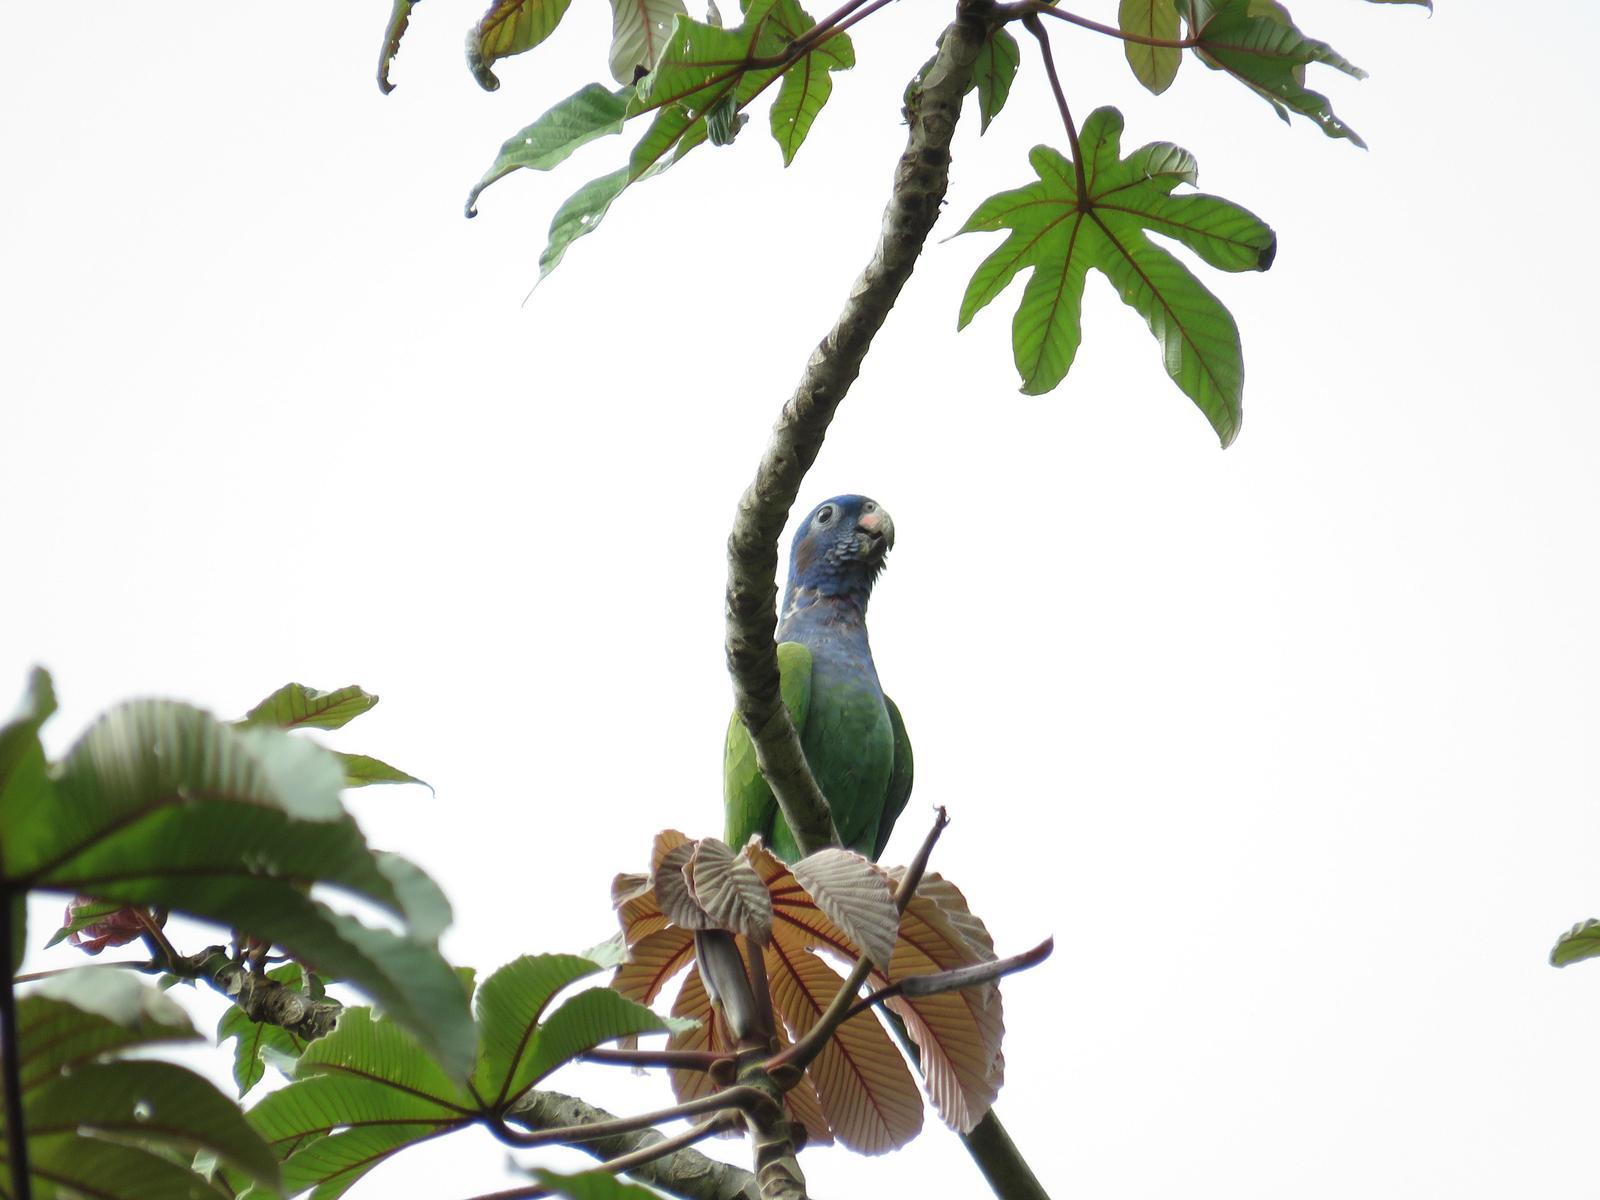 Blue-headed Parrot Photo by Charles Vellios